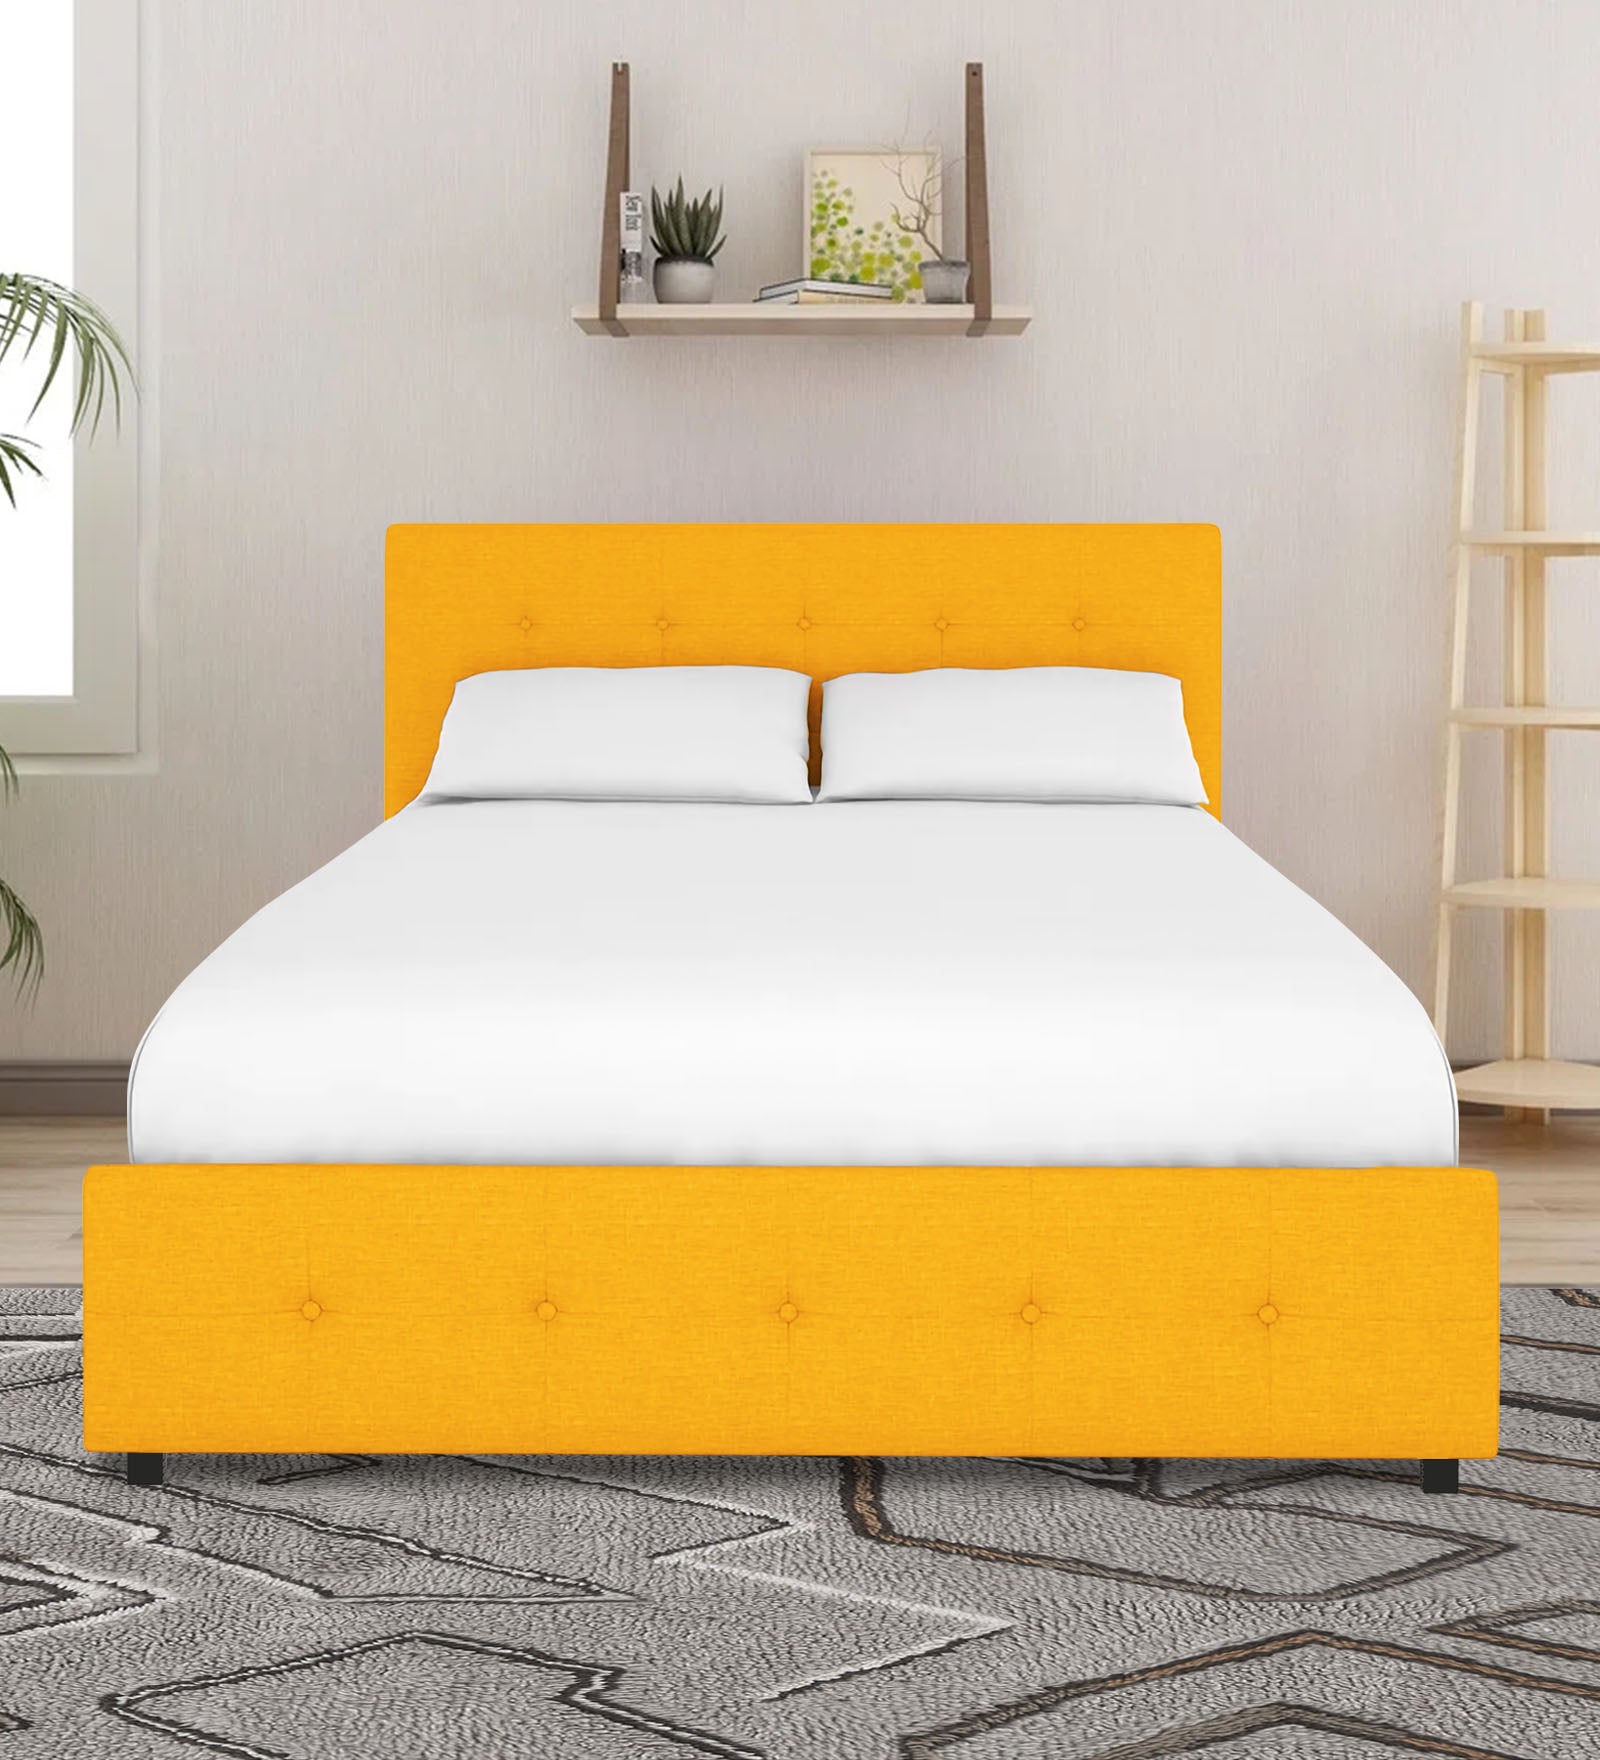 Lido Fabric Queen Size Bed In Bold Yellow Colour With Storage